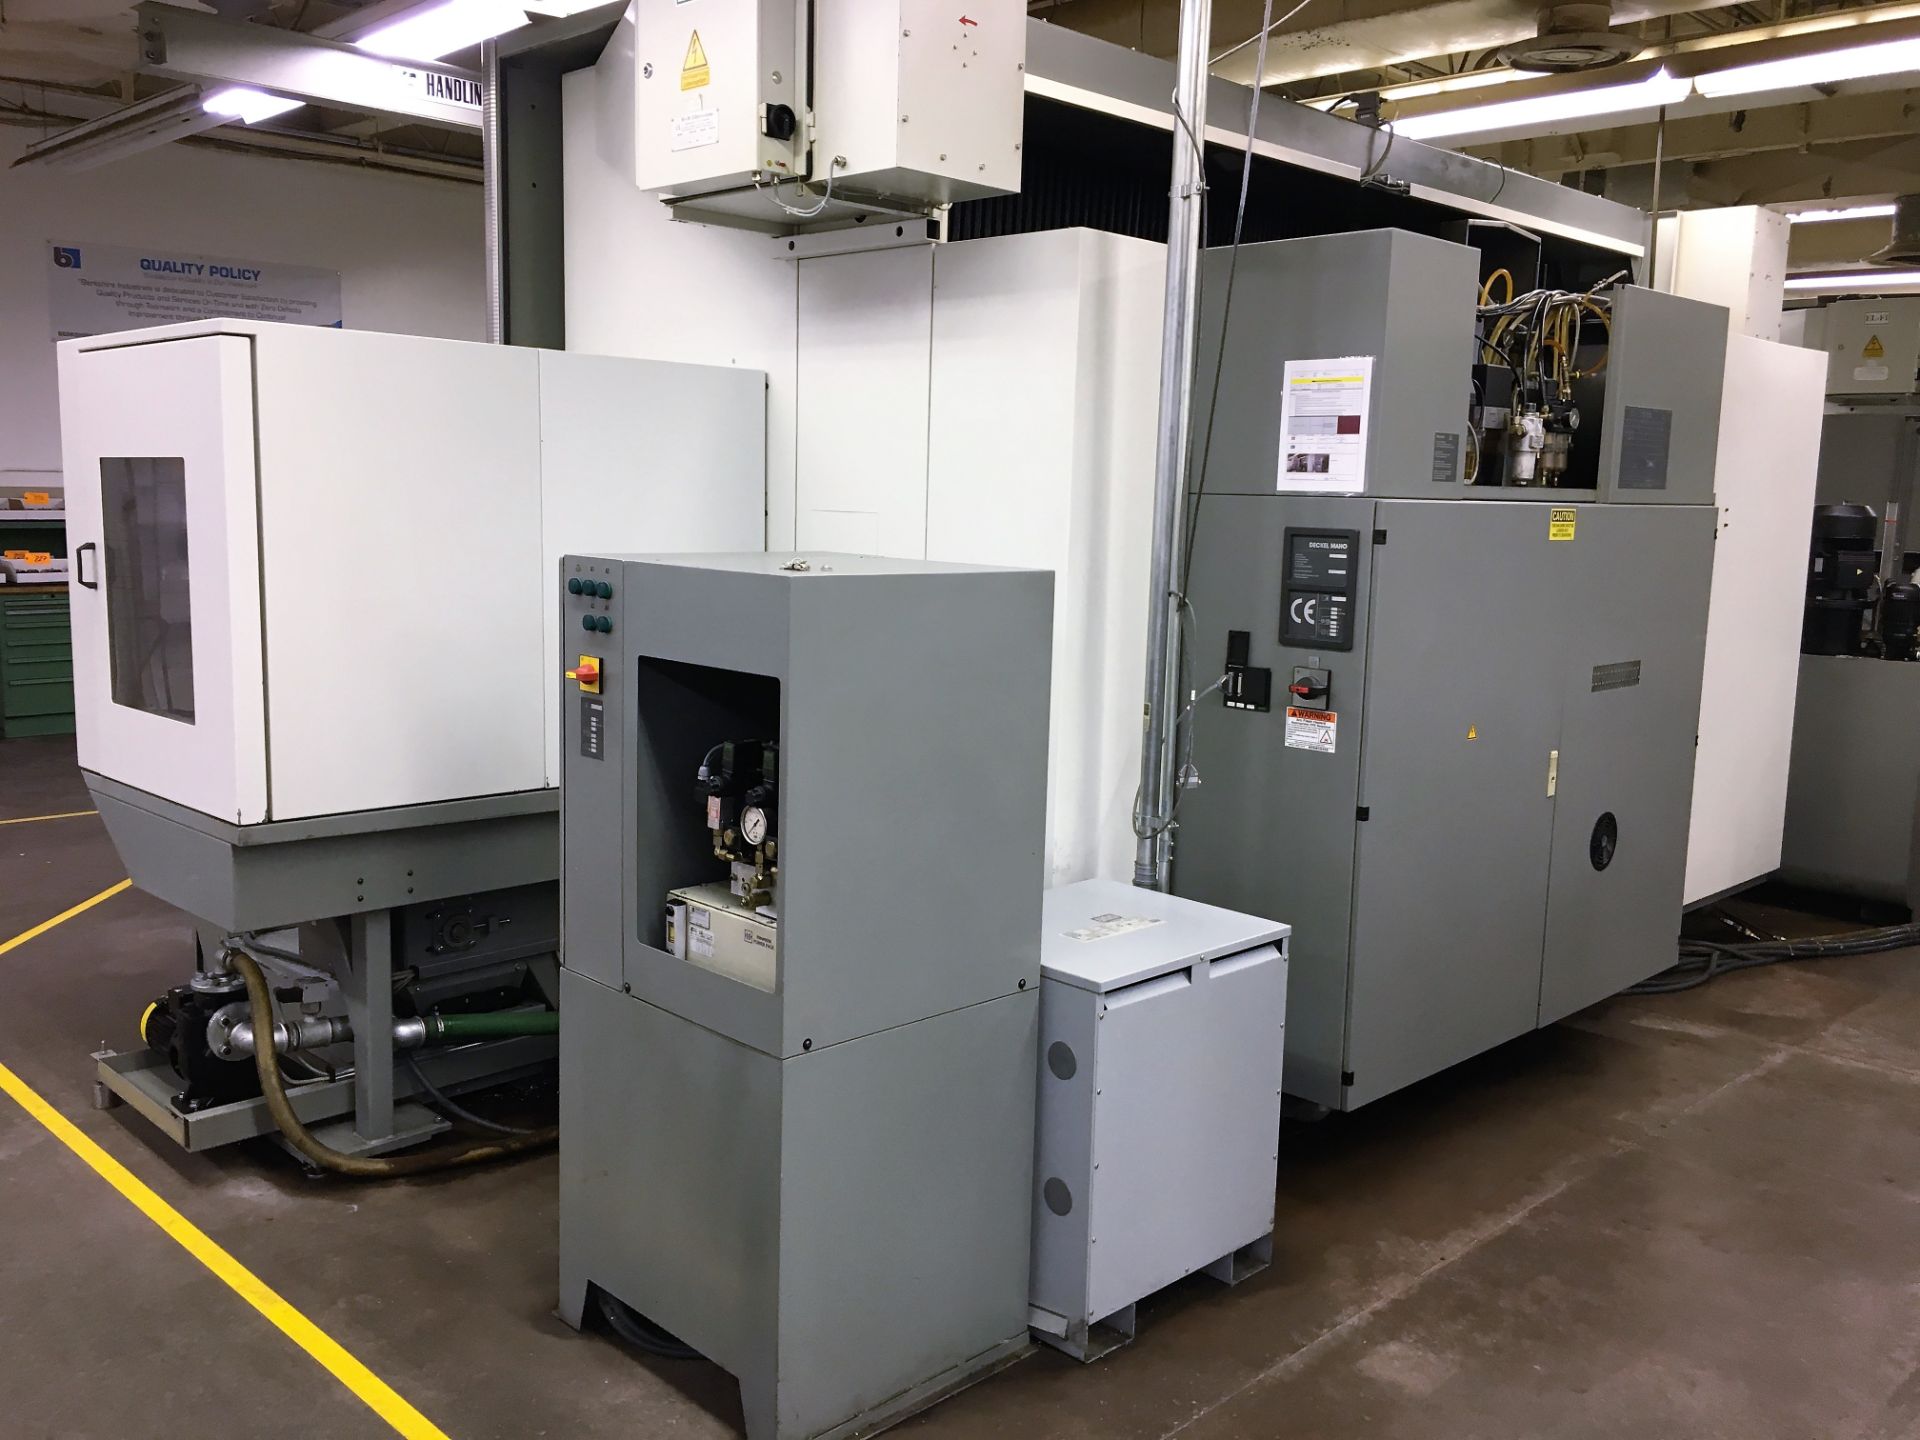 DECKEL-MAHO # DMU-70-VL ''FULL-5-AXIS'' CNC ''TWIN-CNC ROTARY TABLE'' VERTICAL MACHINING CENTER WITH - Image 6 of 7